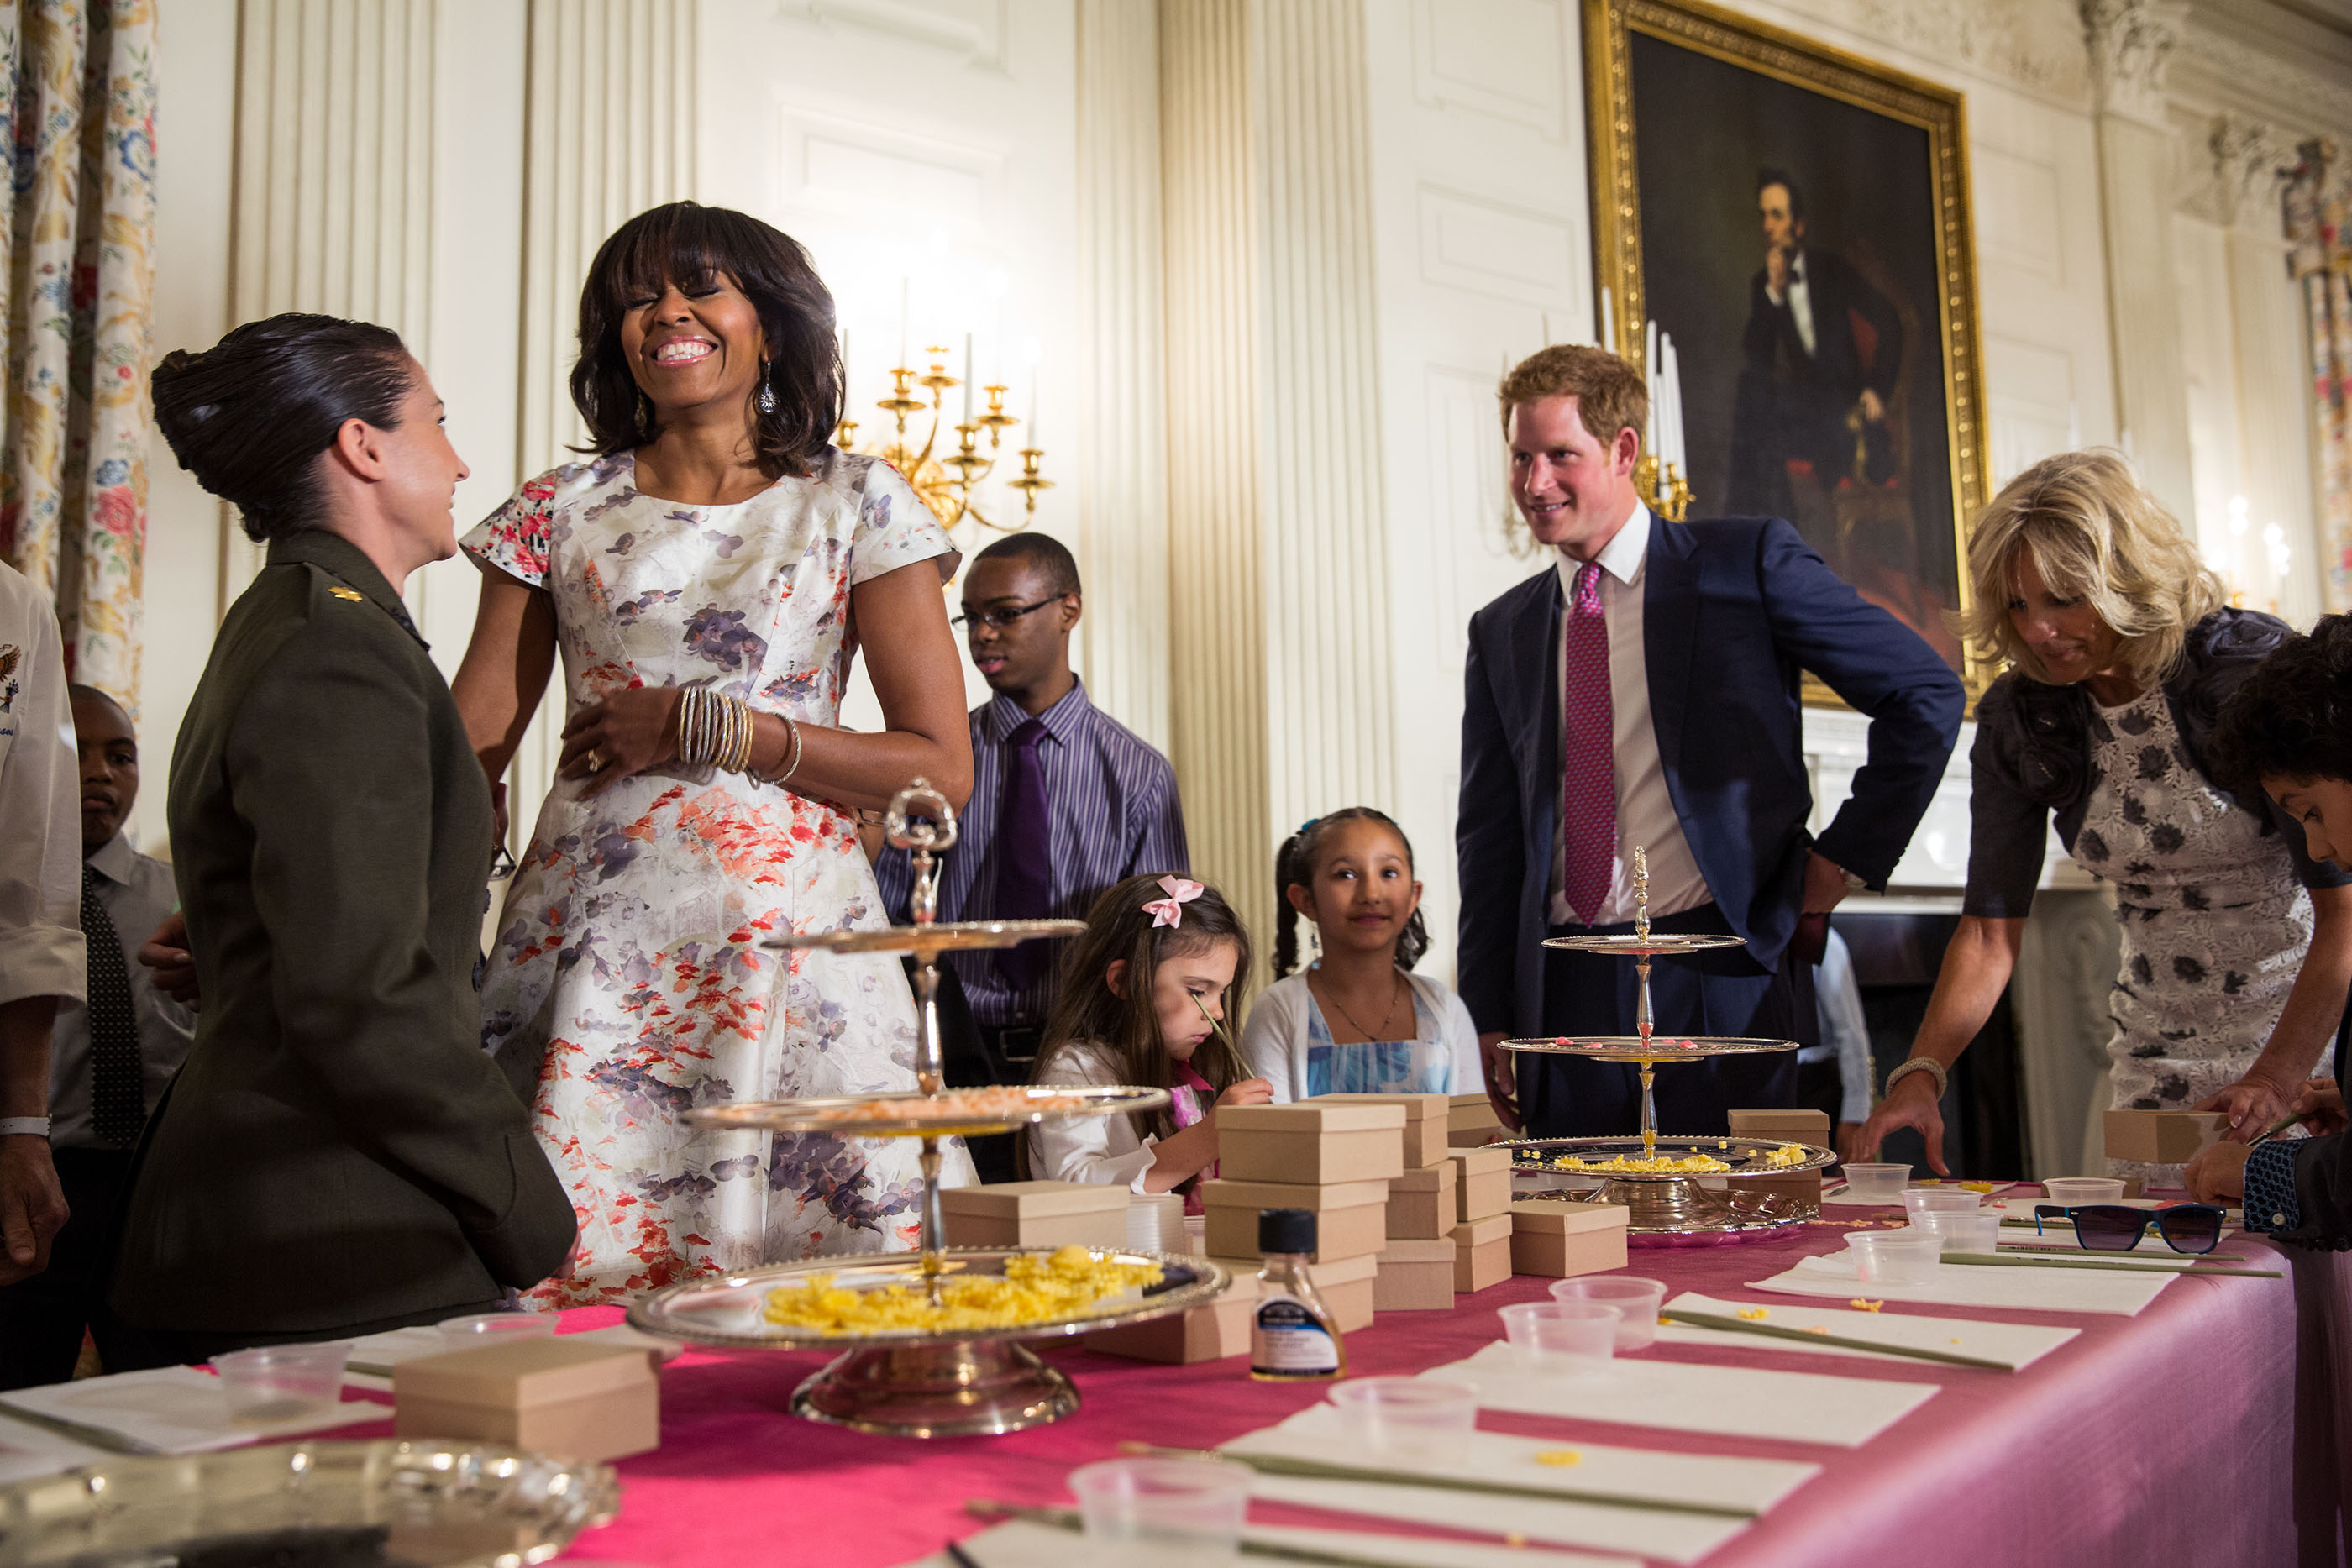 The First Lady, Dr. Biden and Prince Harry of Wales help military children create Mother's Day cards in the State Dining Room of the White House, May 9, 2013.  (Official White House Photo by Lawrence Jackson)